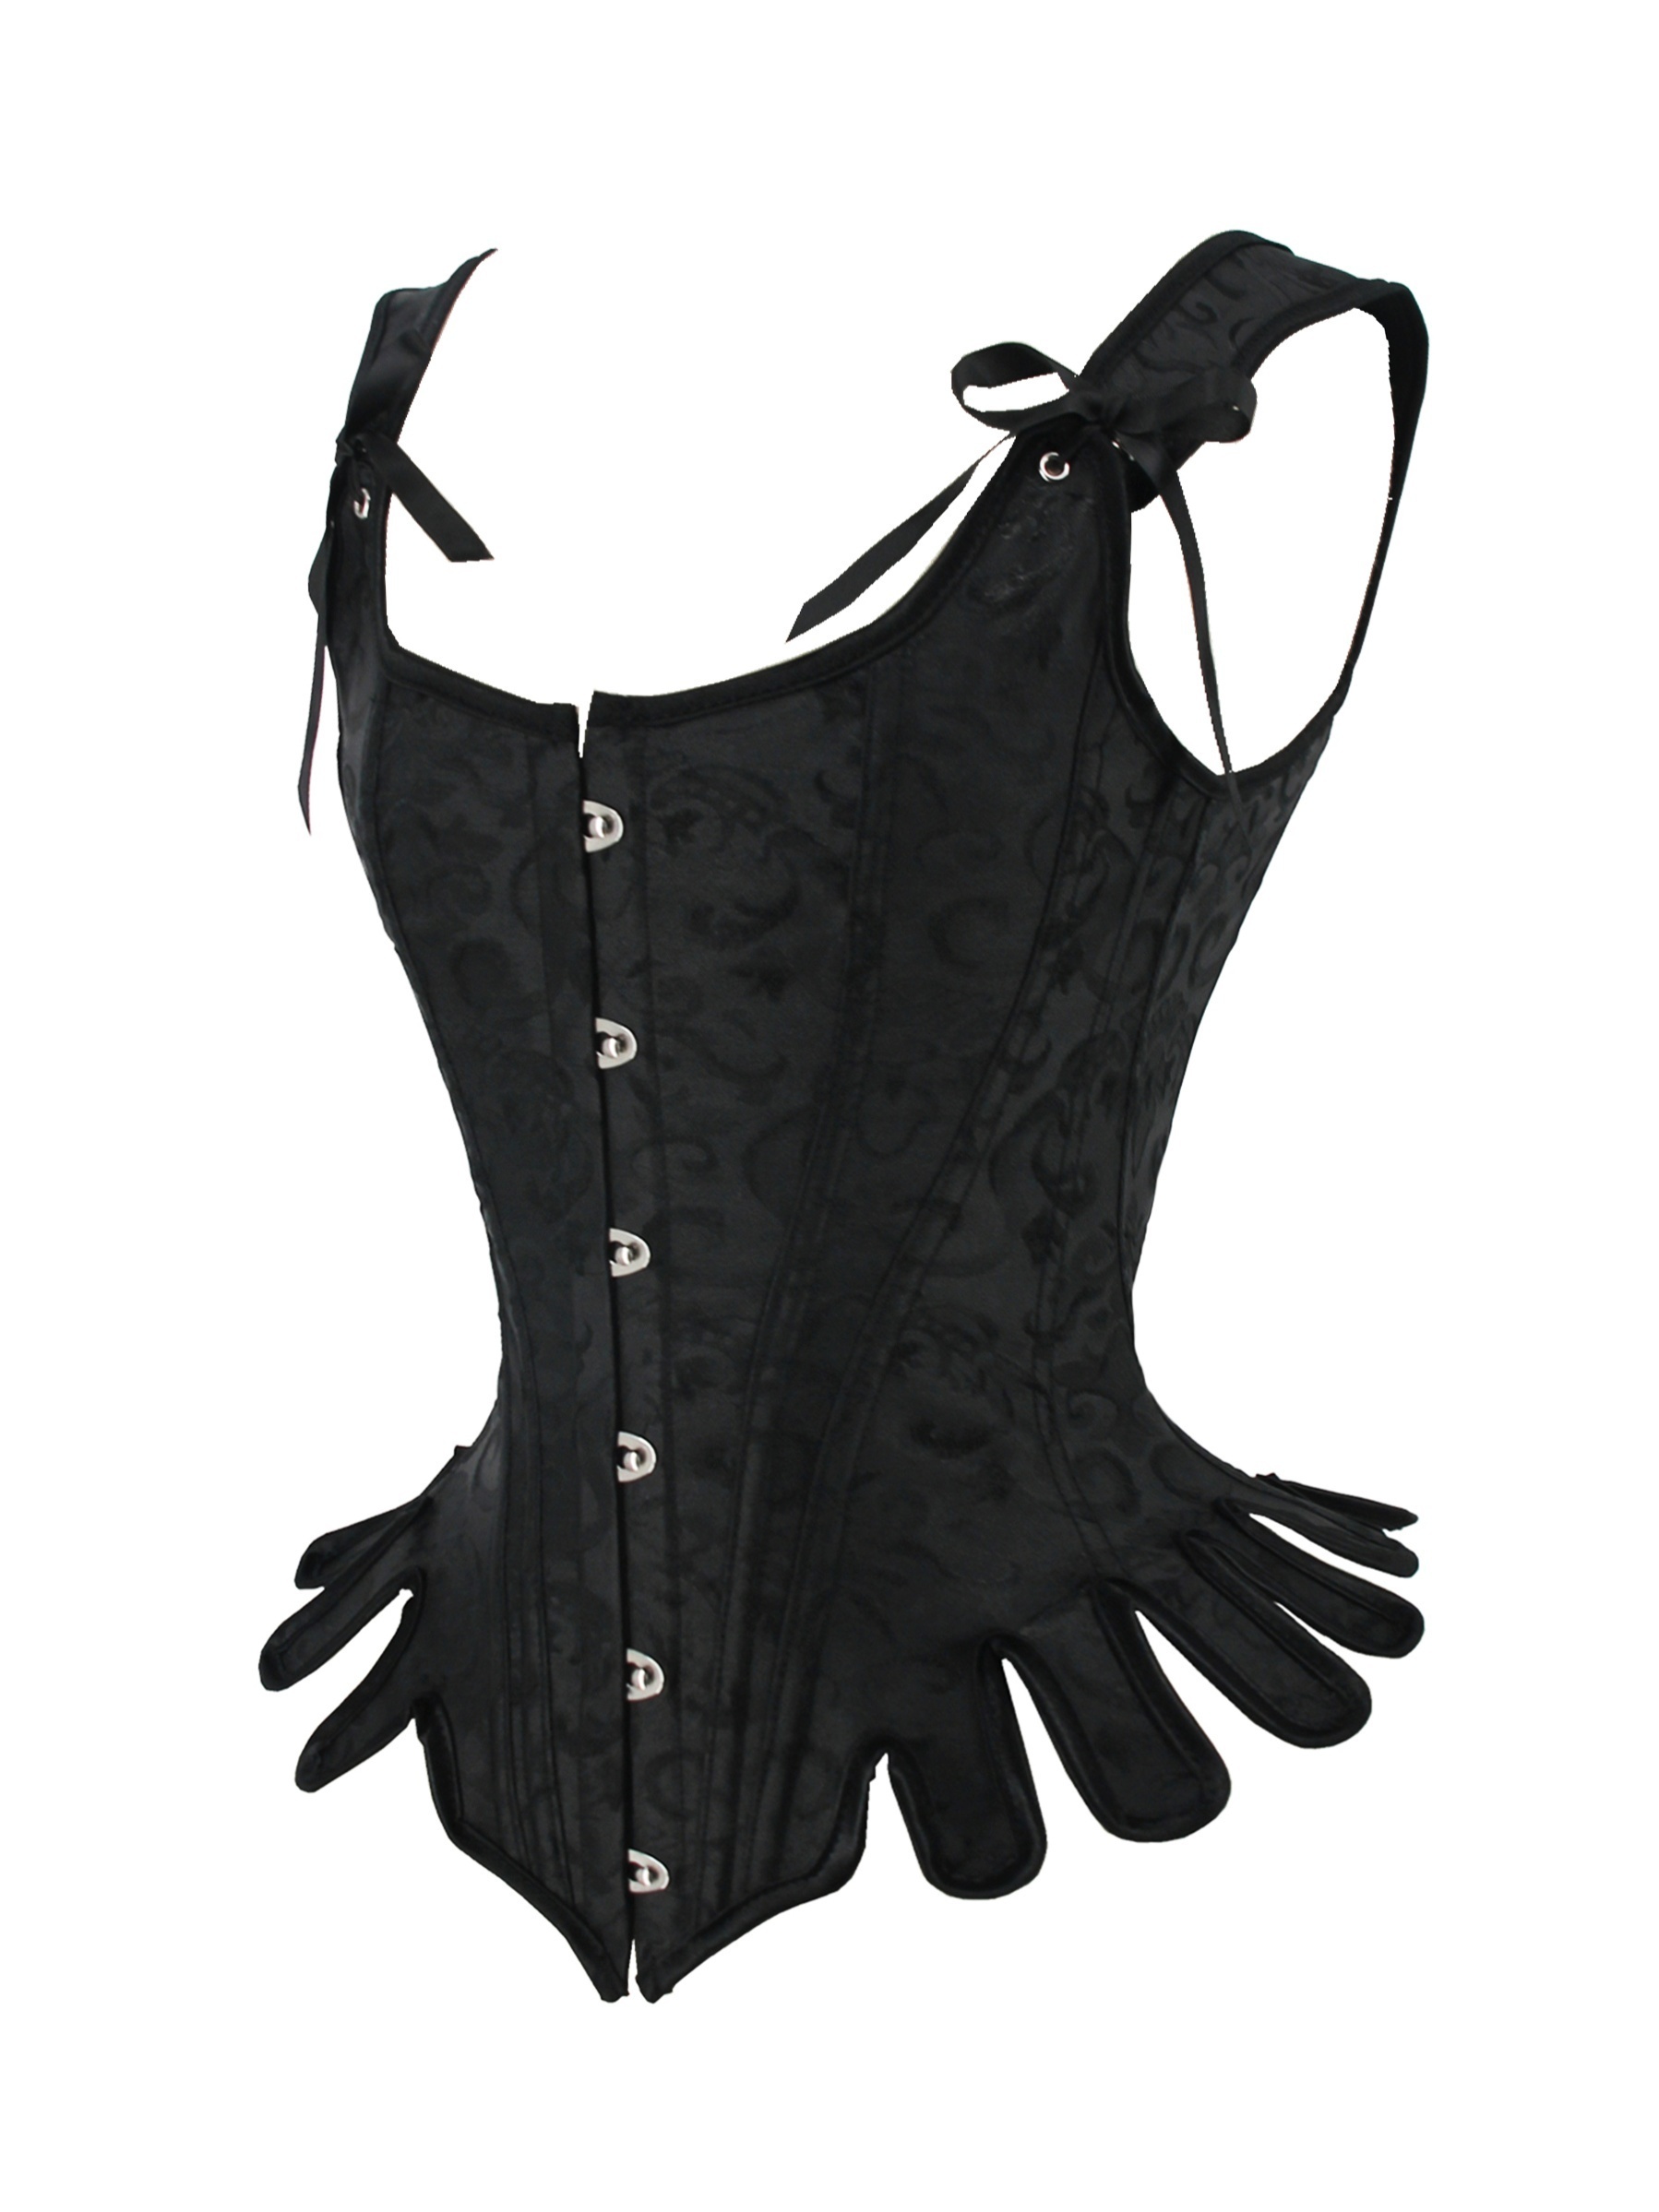 Womens Gothic Steampunk Corset Bustier With Renaissance Pirate